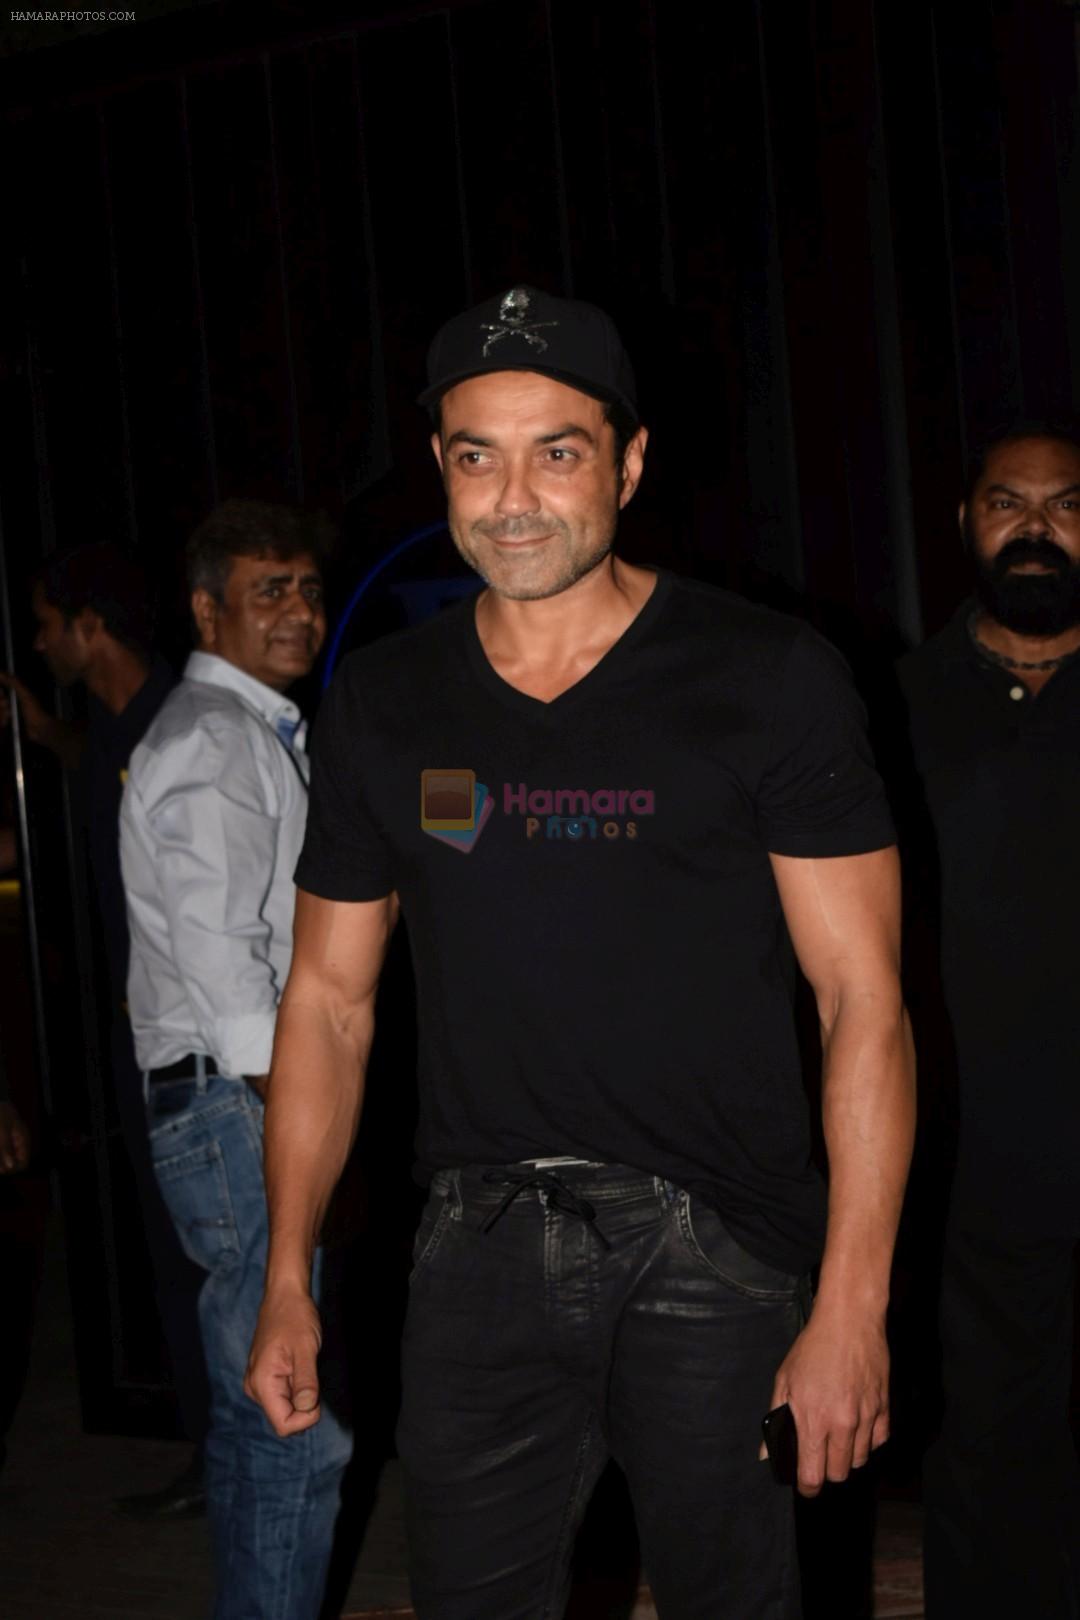 Bobby Deol at Mukesh chhabra's birthday party on 26th May 2018